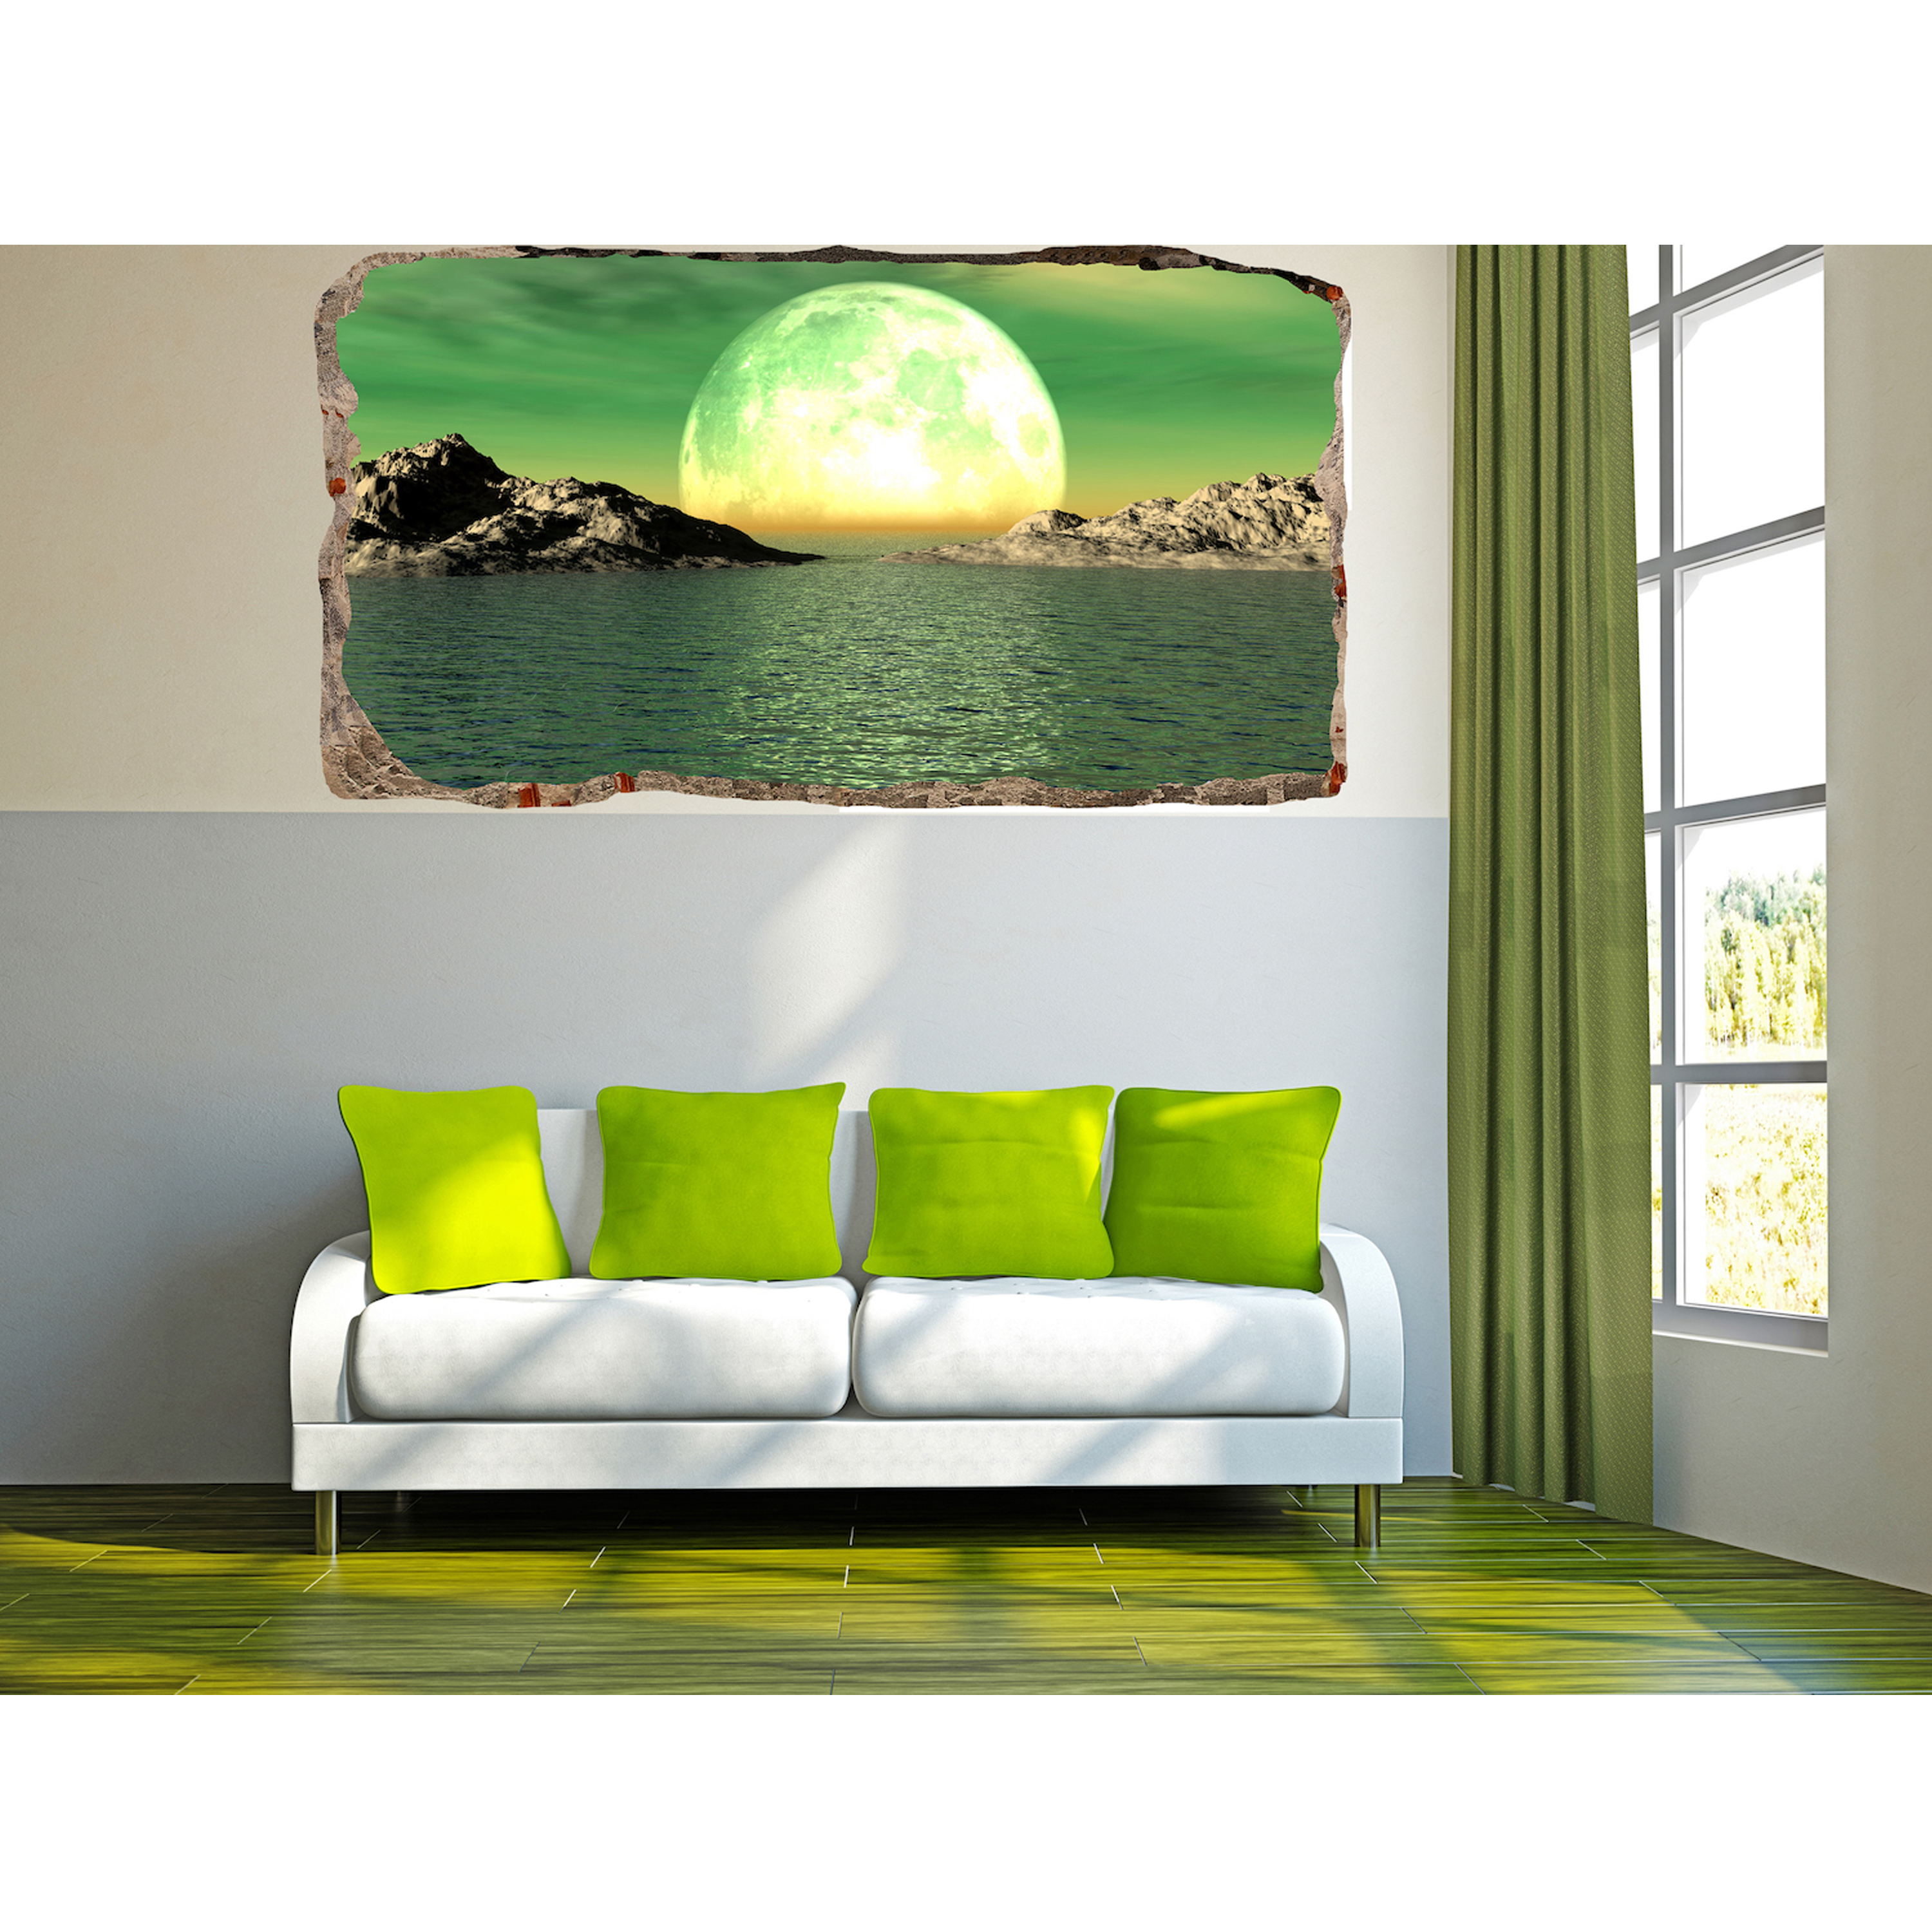 Startonight 3D Mural Wall Art Photo Decor Moon on the Water Amazing Dual View Surprise Medium Wall Mural Wallpaper for Bedroom Beach Landscapes Collection Wall Paper Art 32.28 inch By 59.06 inch - image 1 of 4